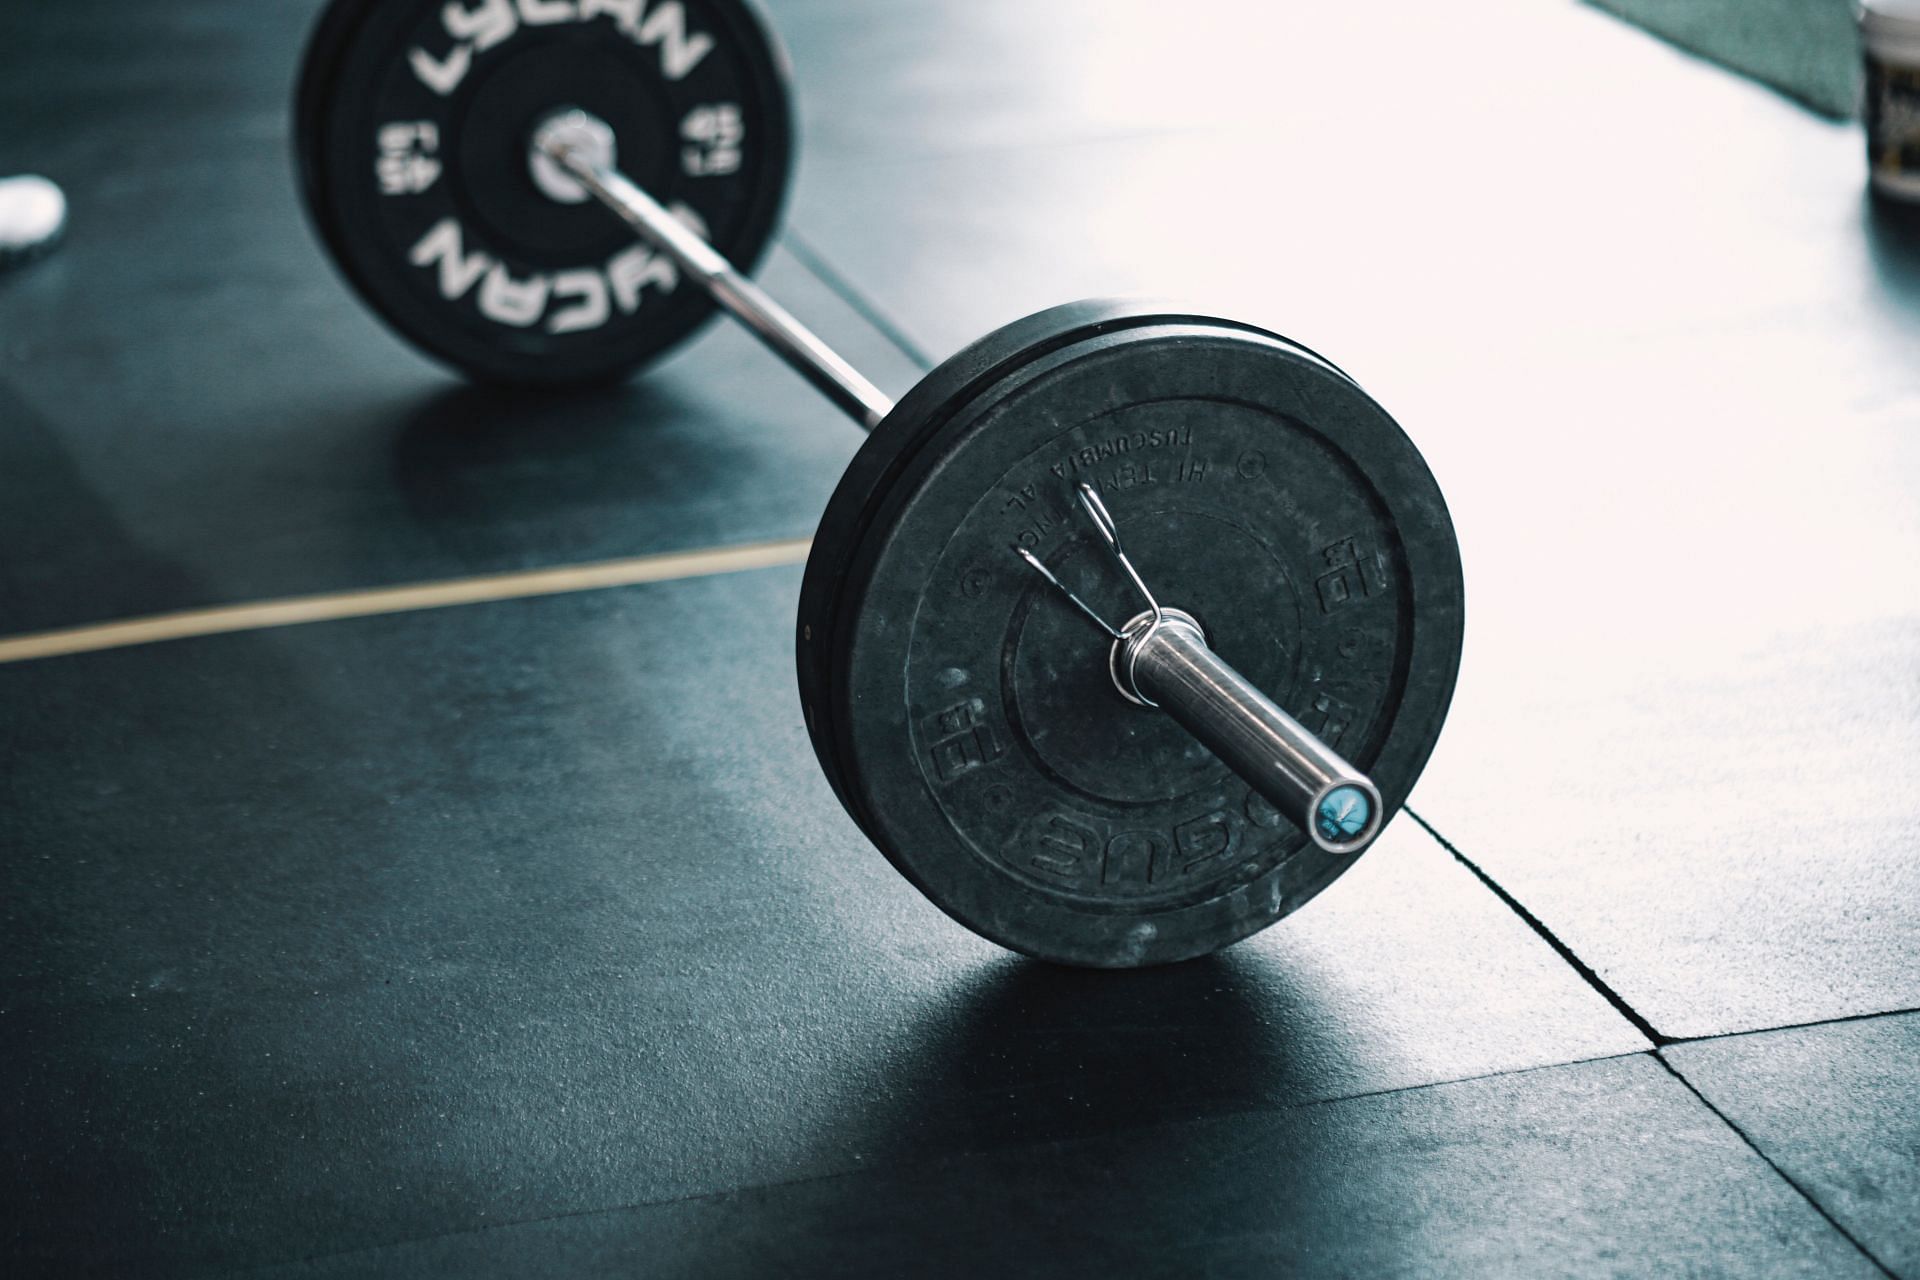 Barbell is the most underrated equipment that helps in building serious gains. (Image via Unsplash / Eduardo Cano)